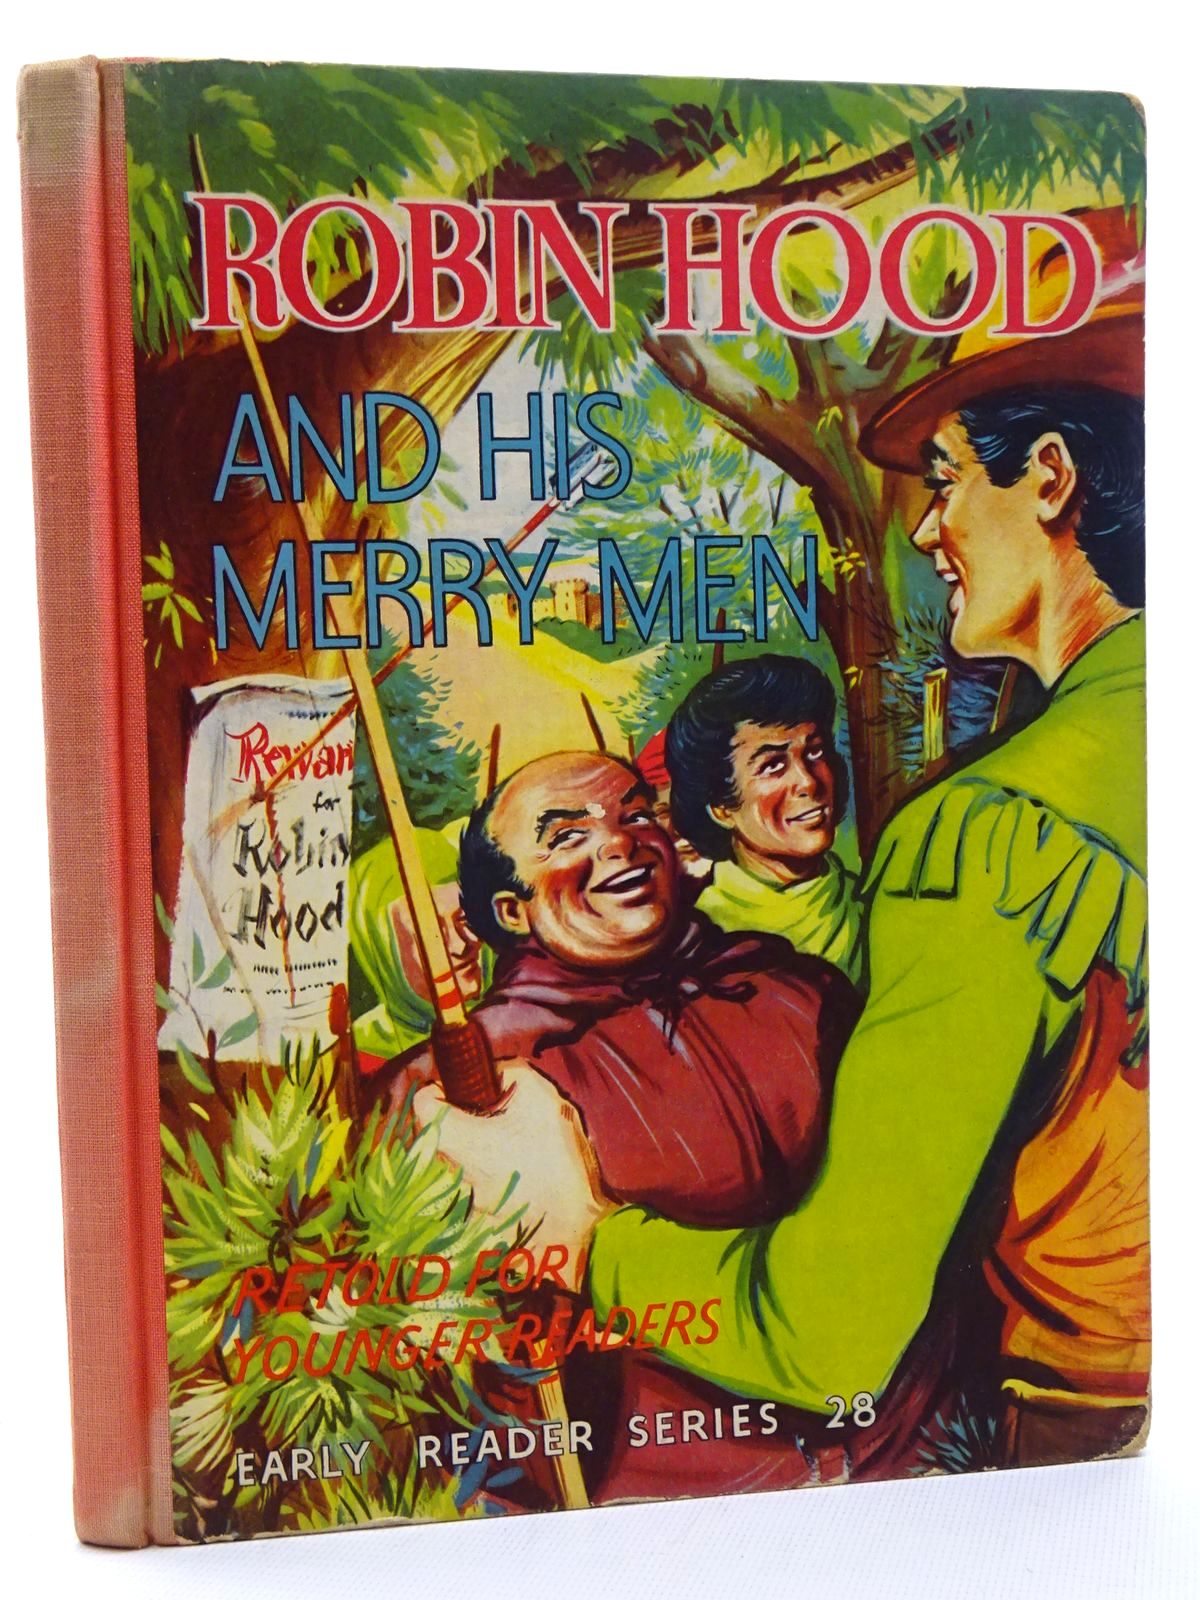 Photo of ROBIN HOOD AND HIS MERRY MEN published by Hampster Books (STOCK CODE: 1815994)  for sale by Stella & Rose's Books